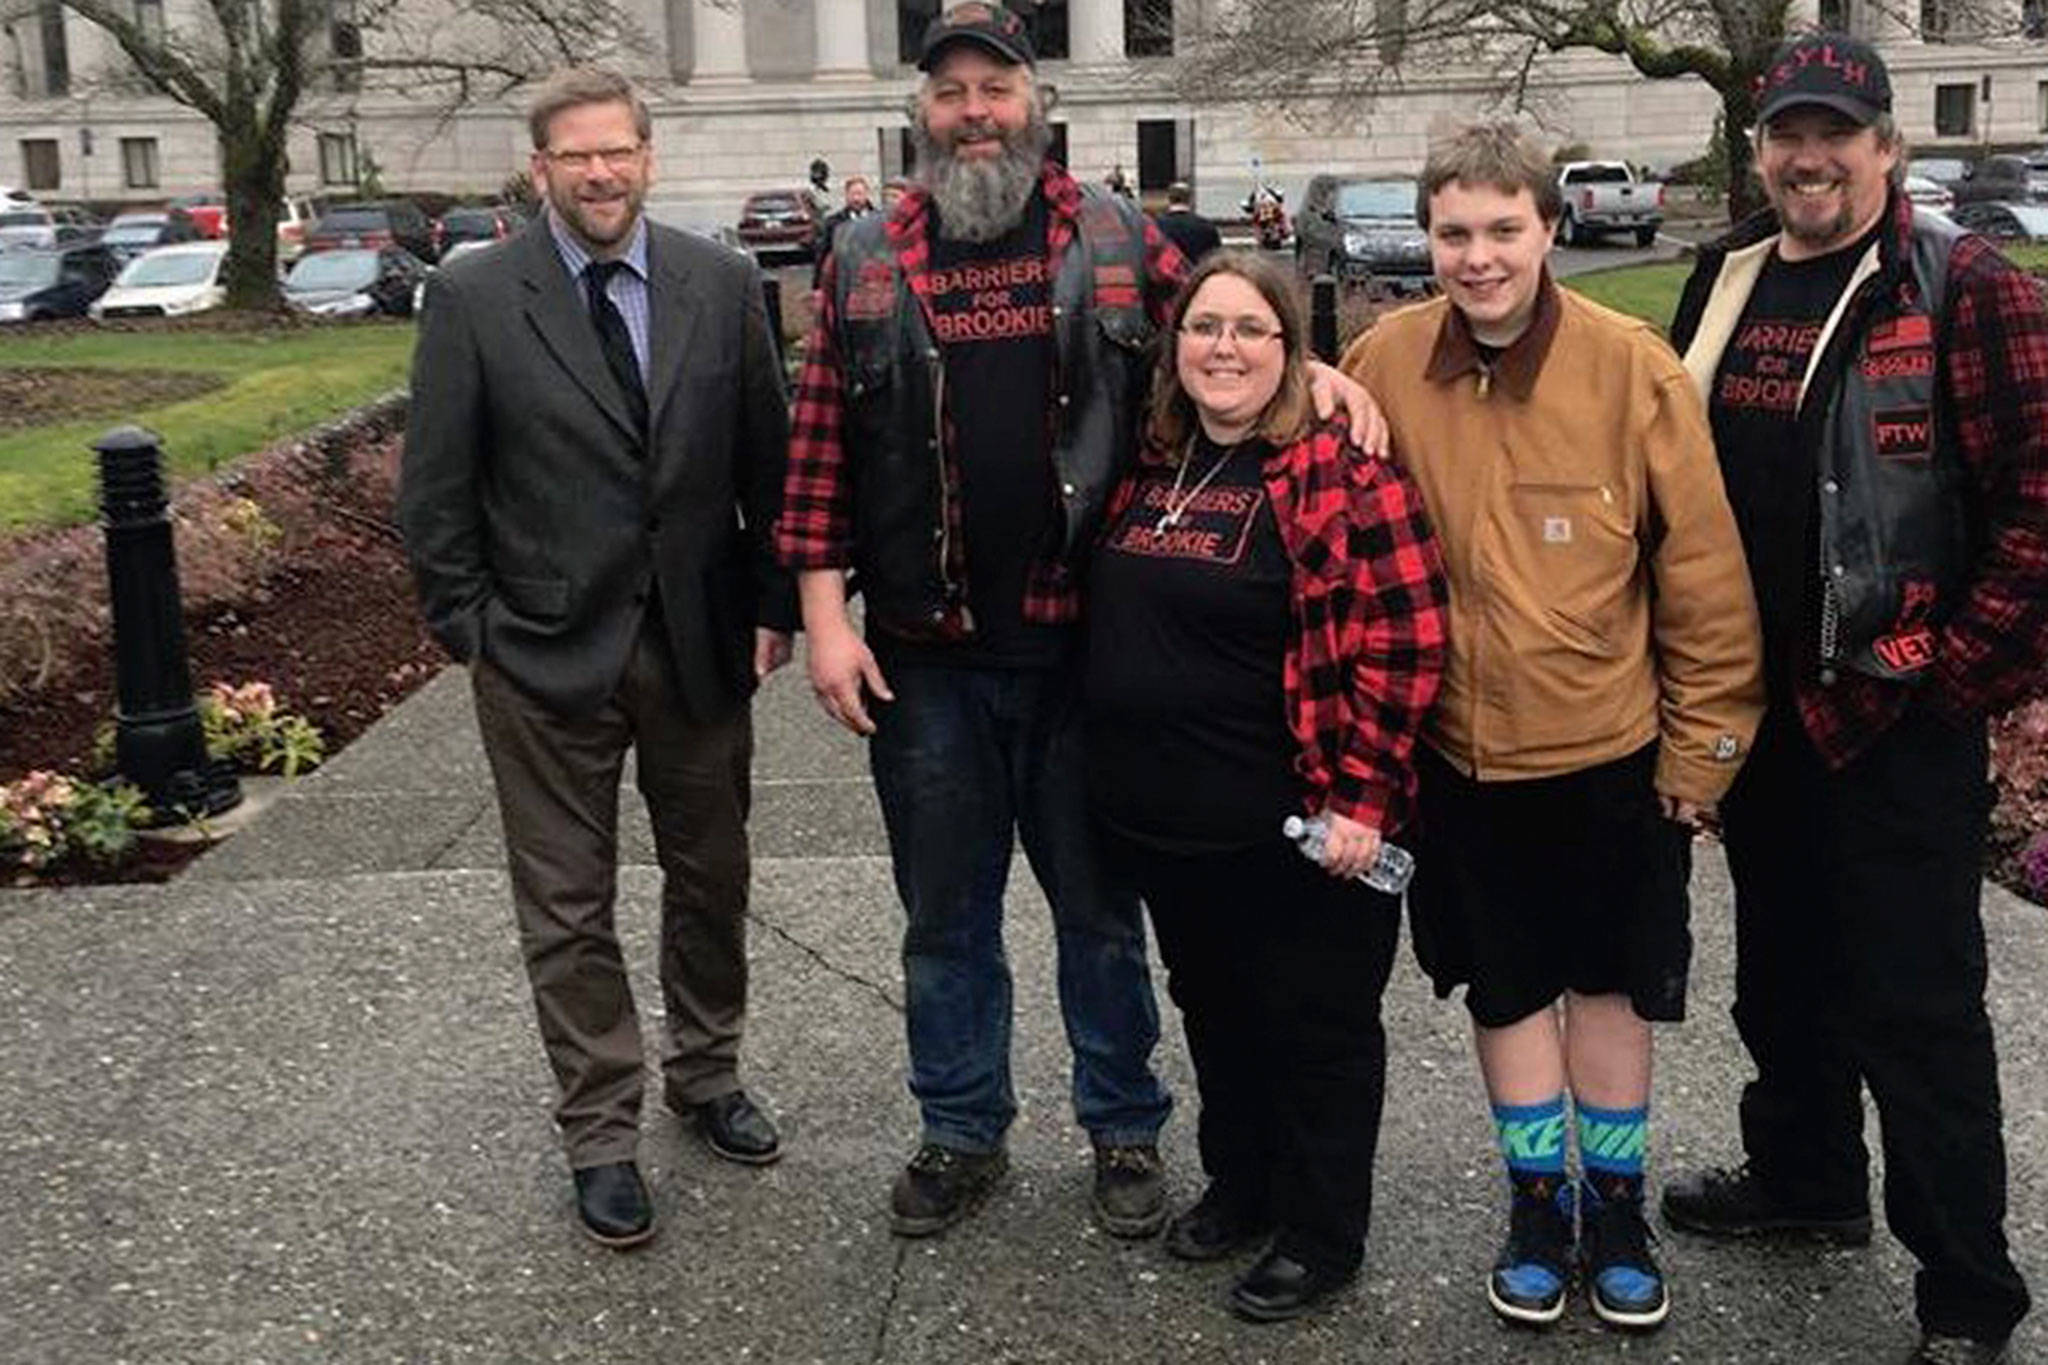 State Representative Mike Chapman, left, stands with the Bedinger family, including Don Bedinger, Kim Bedinger, Chase Bedinger, and James Kirkpatrick in Olympia. The Bedinger family asks community members to send letters of support to Chapman for improvements to the Morse Creek curve east of Port Angeles as he proposes a $5 million budget proviso to the 2019-21 state spending plan. Photo courtesy of the Bedinger family